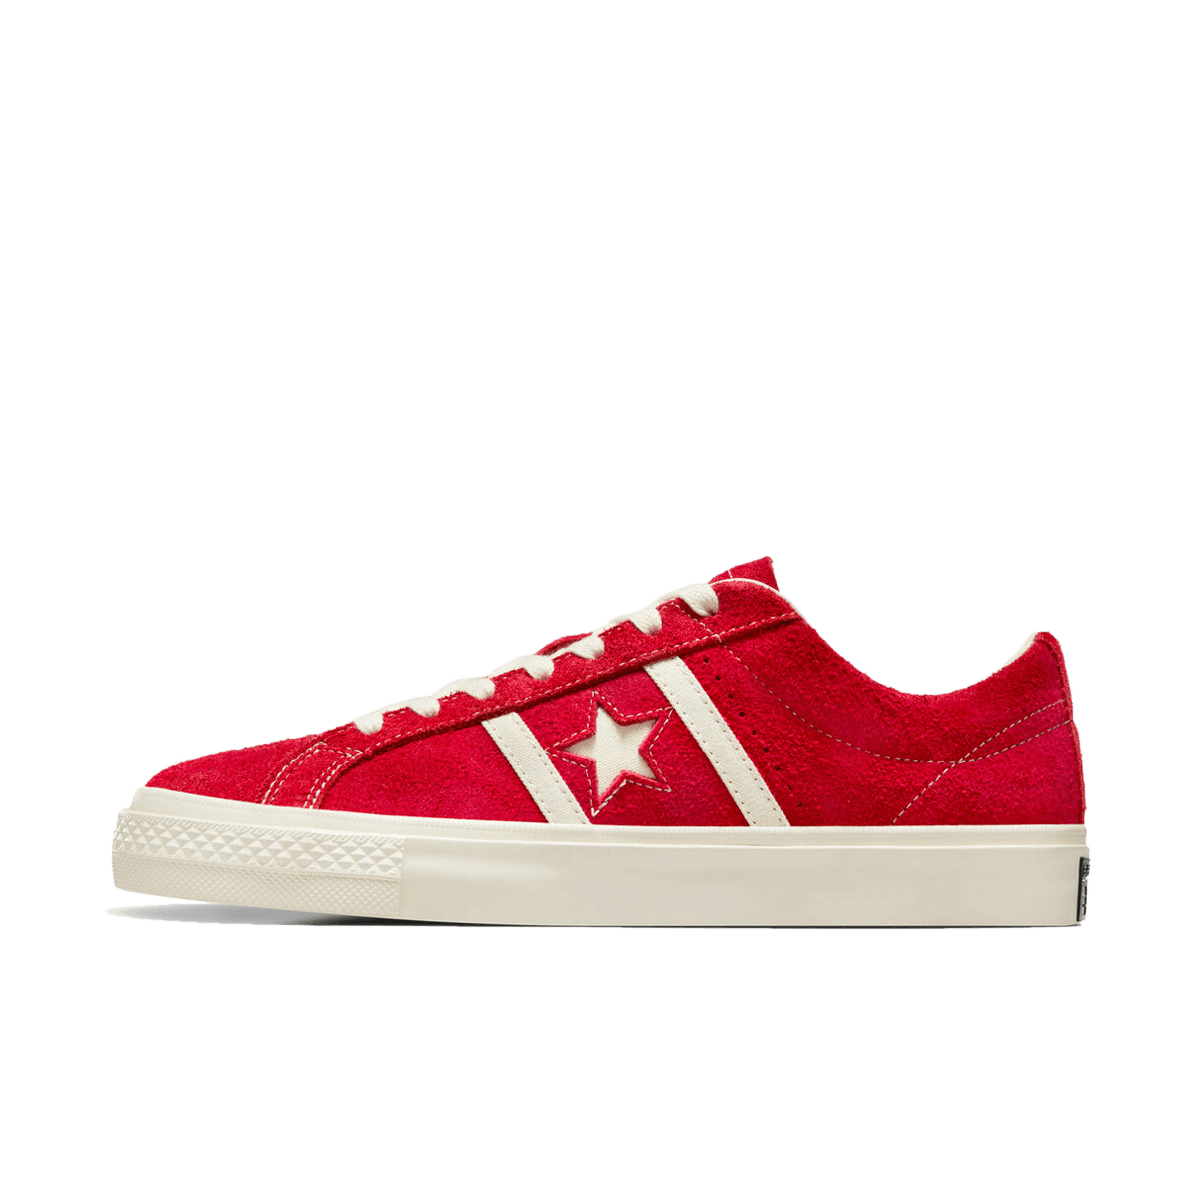 Converse One Star Academy Pro Suede 'Red' A07620C